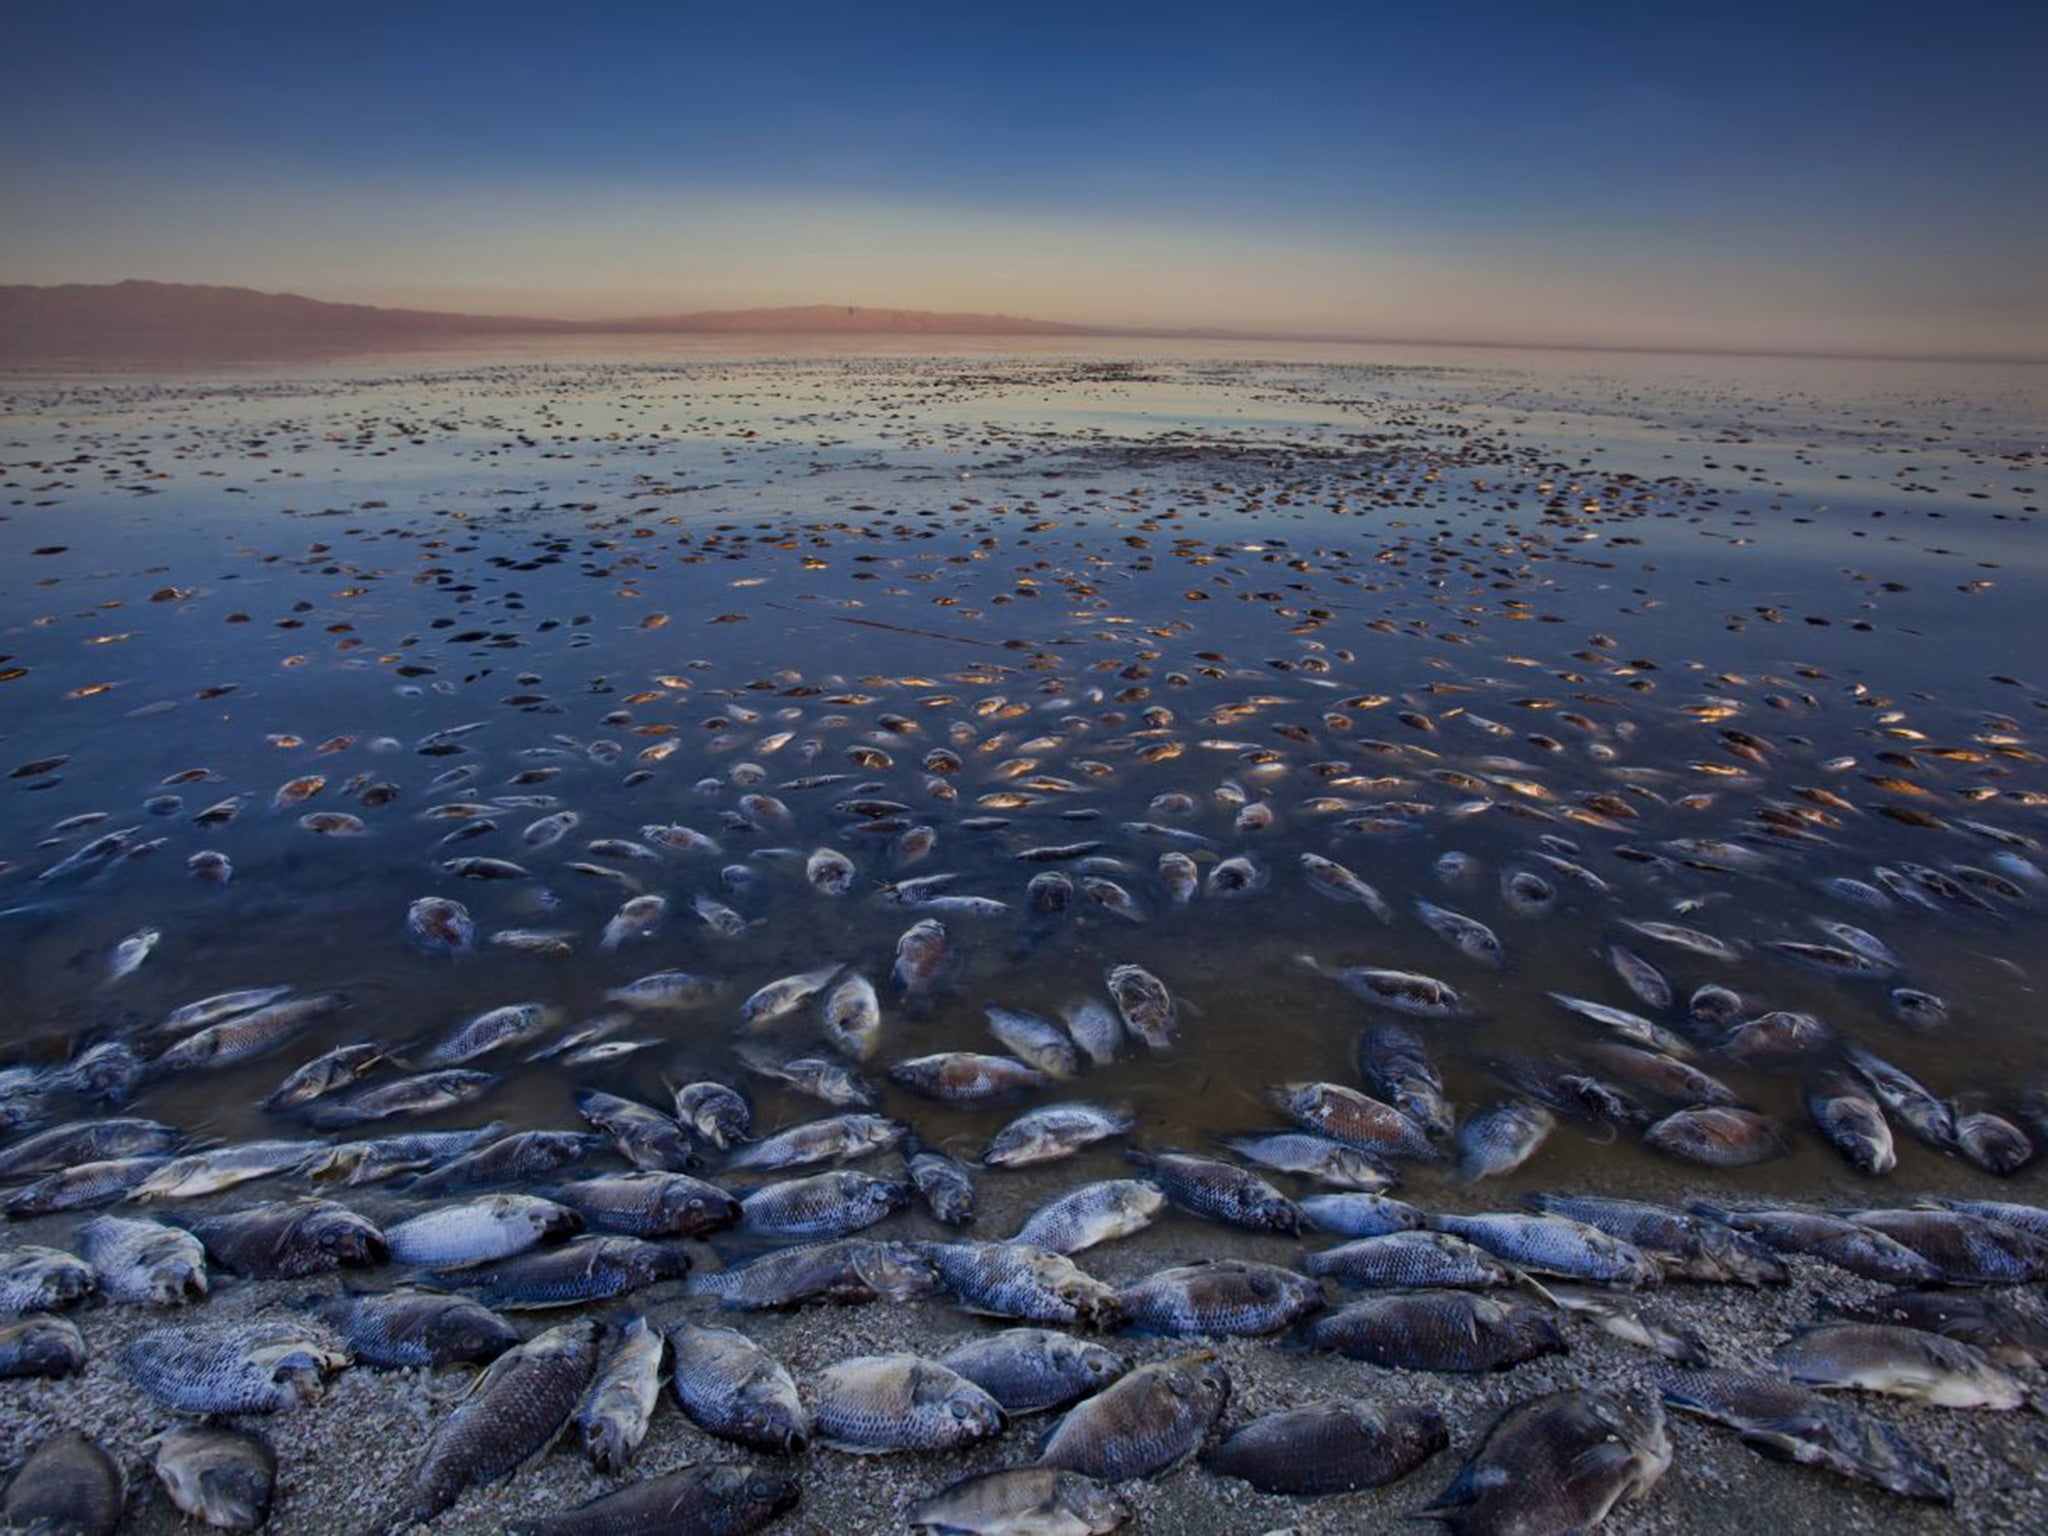 Can You Swim In The Salton Sea 2020 Salton Sea California Drought Could Soon See The State S Largest Body Of Water Sleeping With The Fishes The Independent